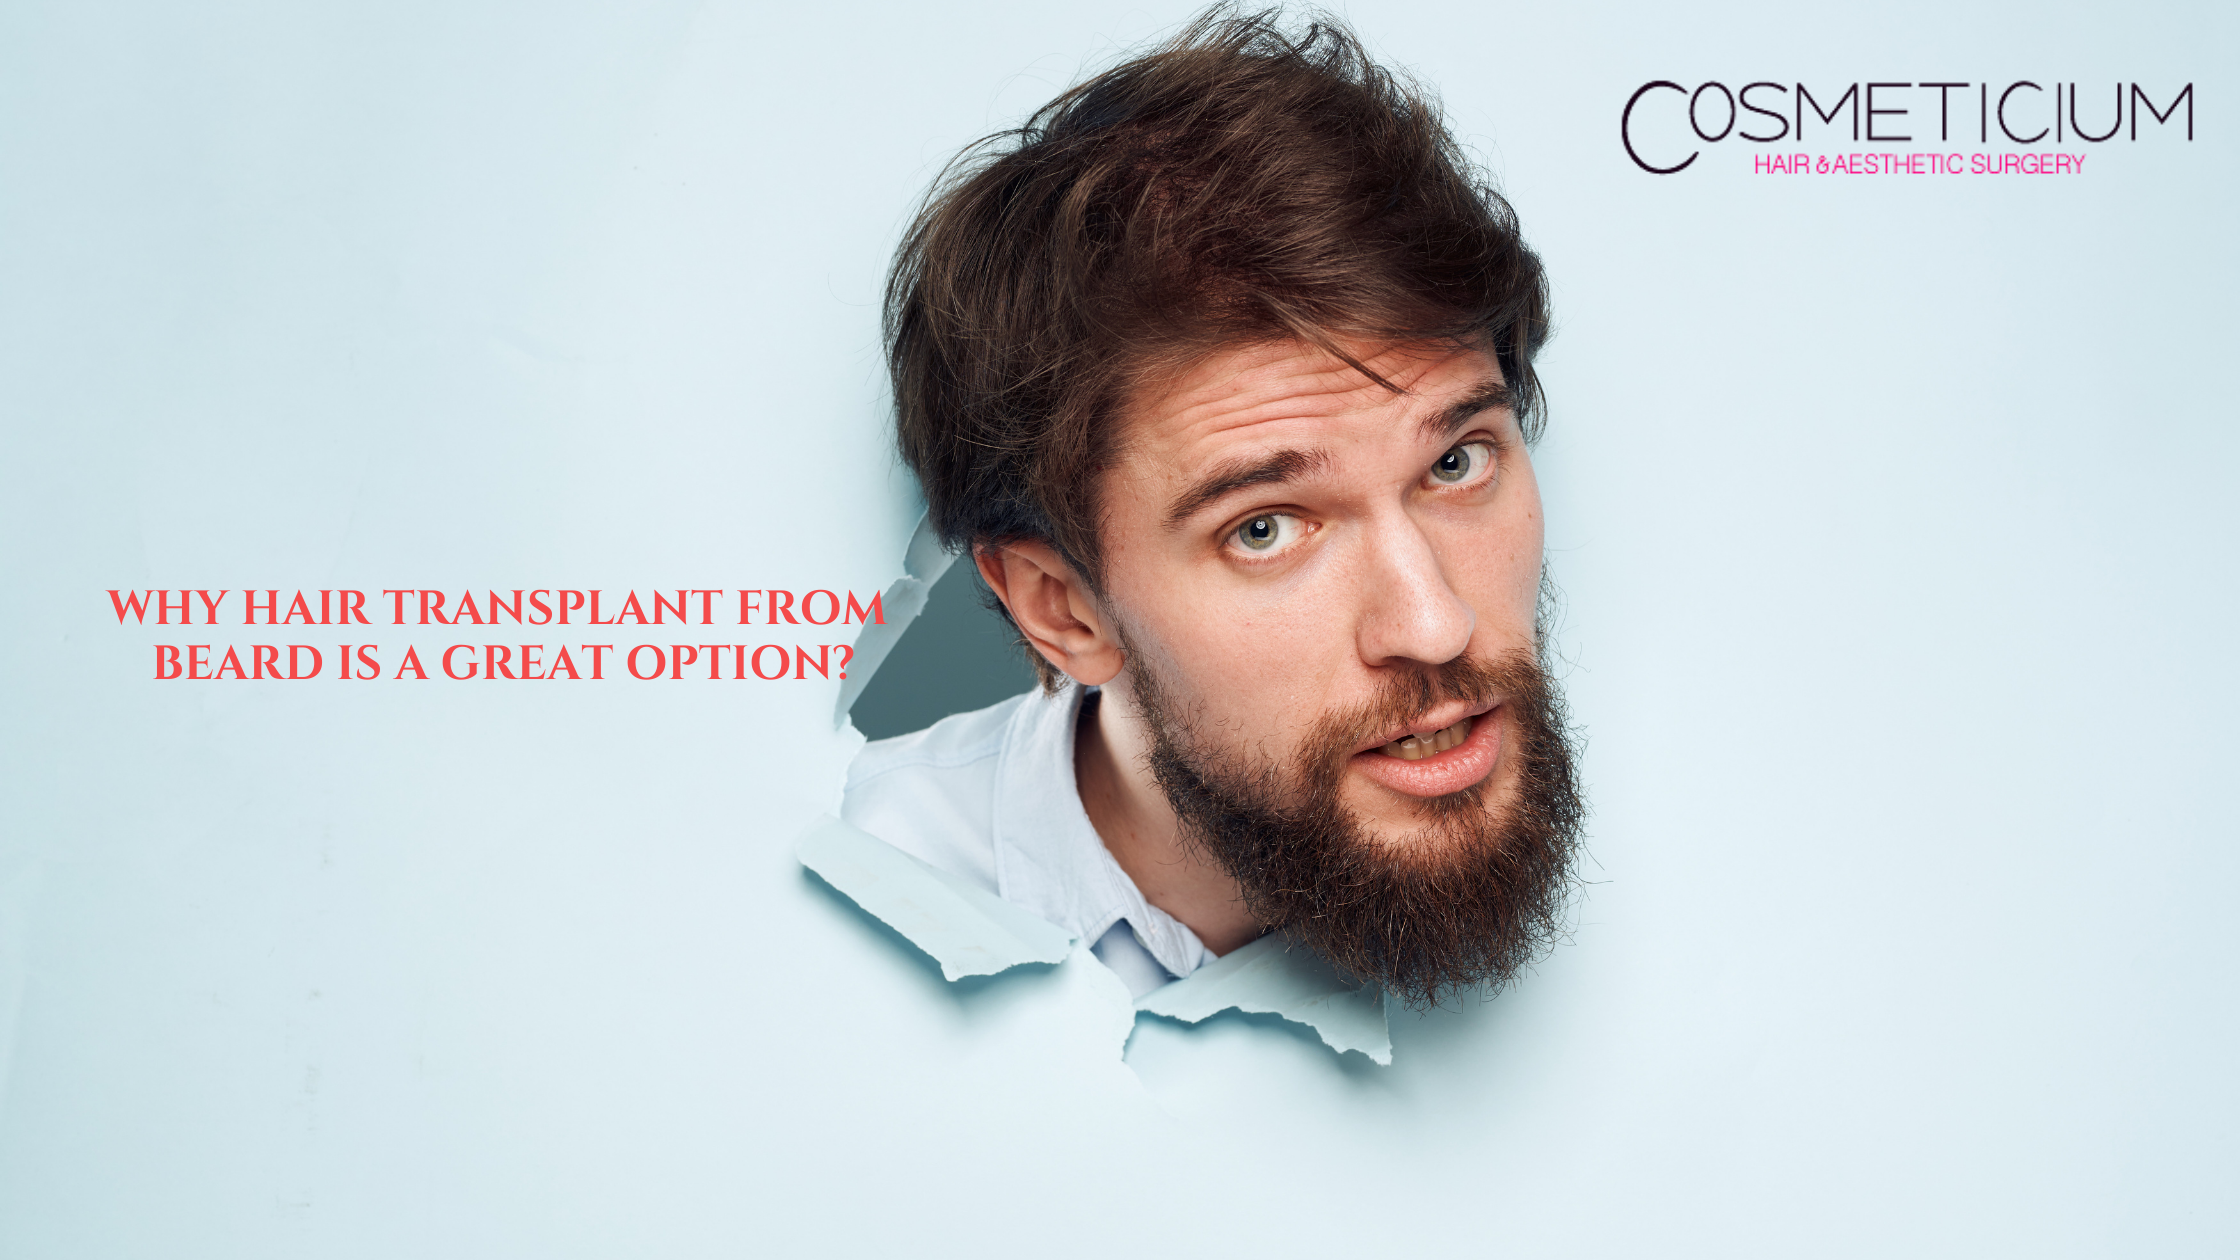 Why Hair Transplant from Beard is a Great Option?